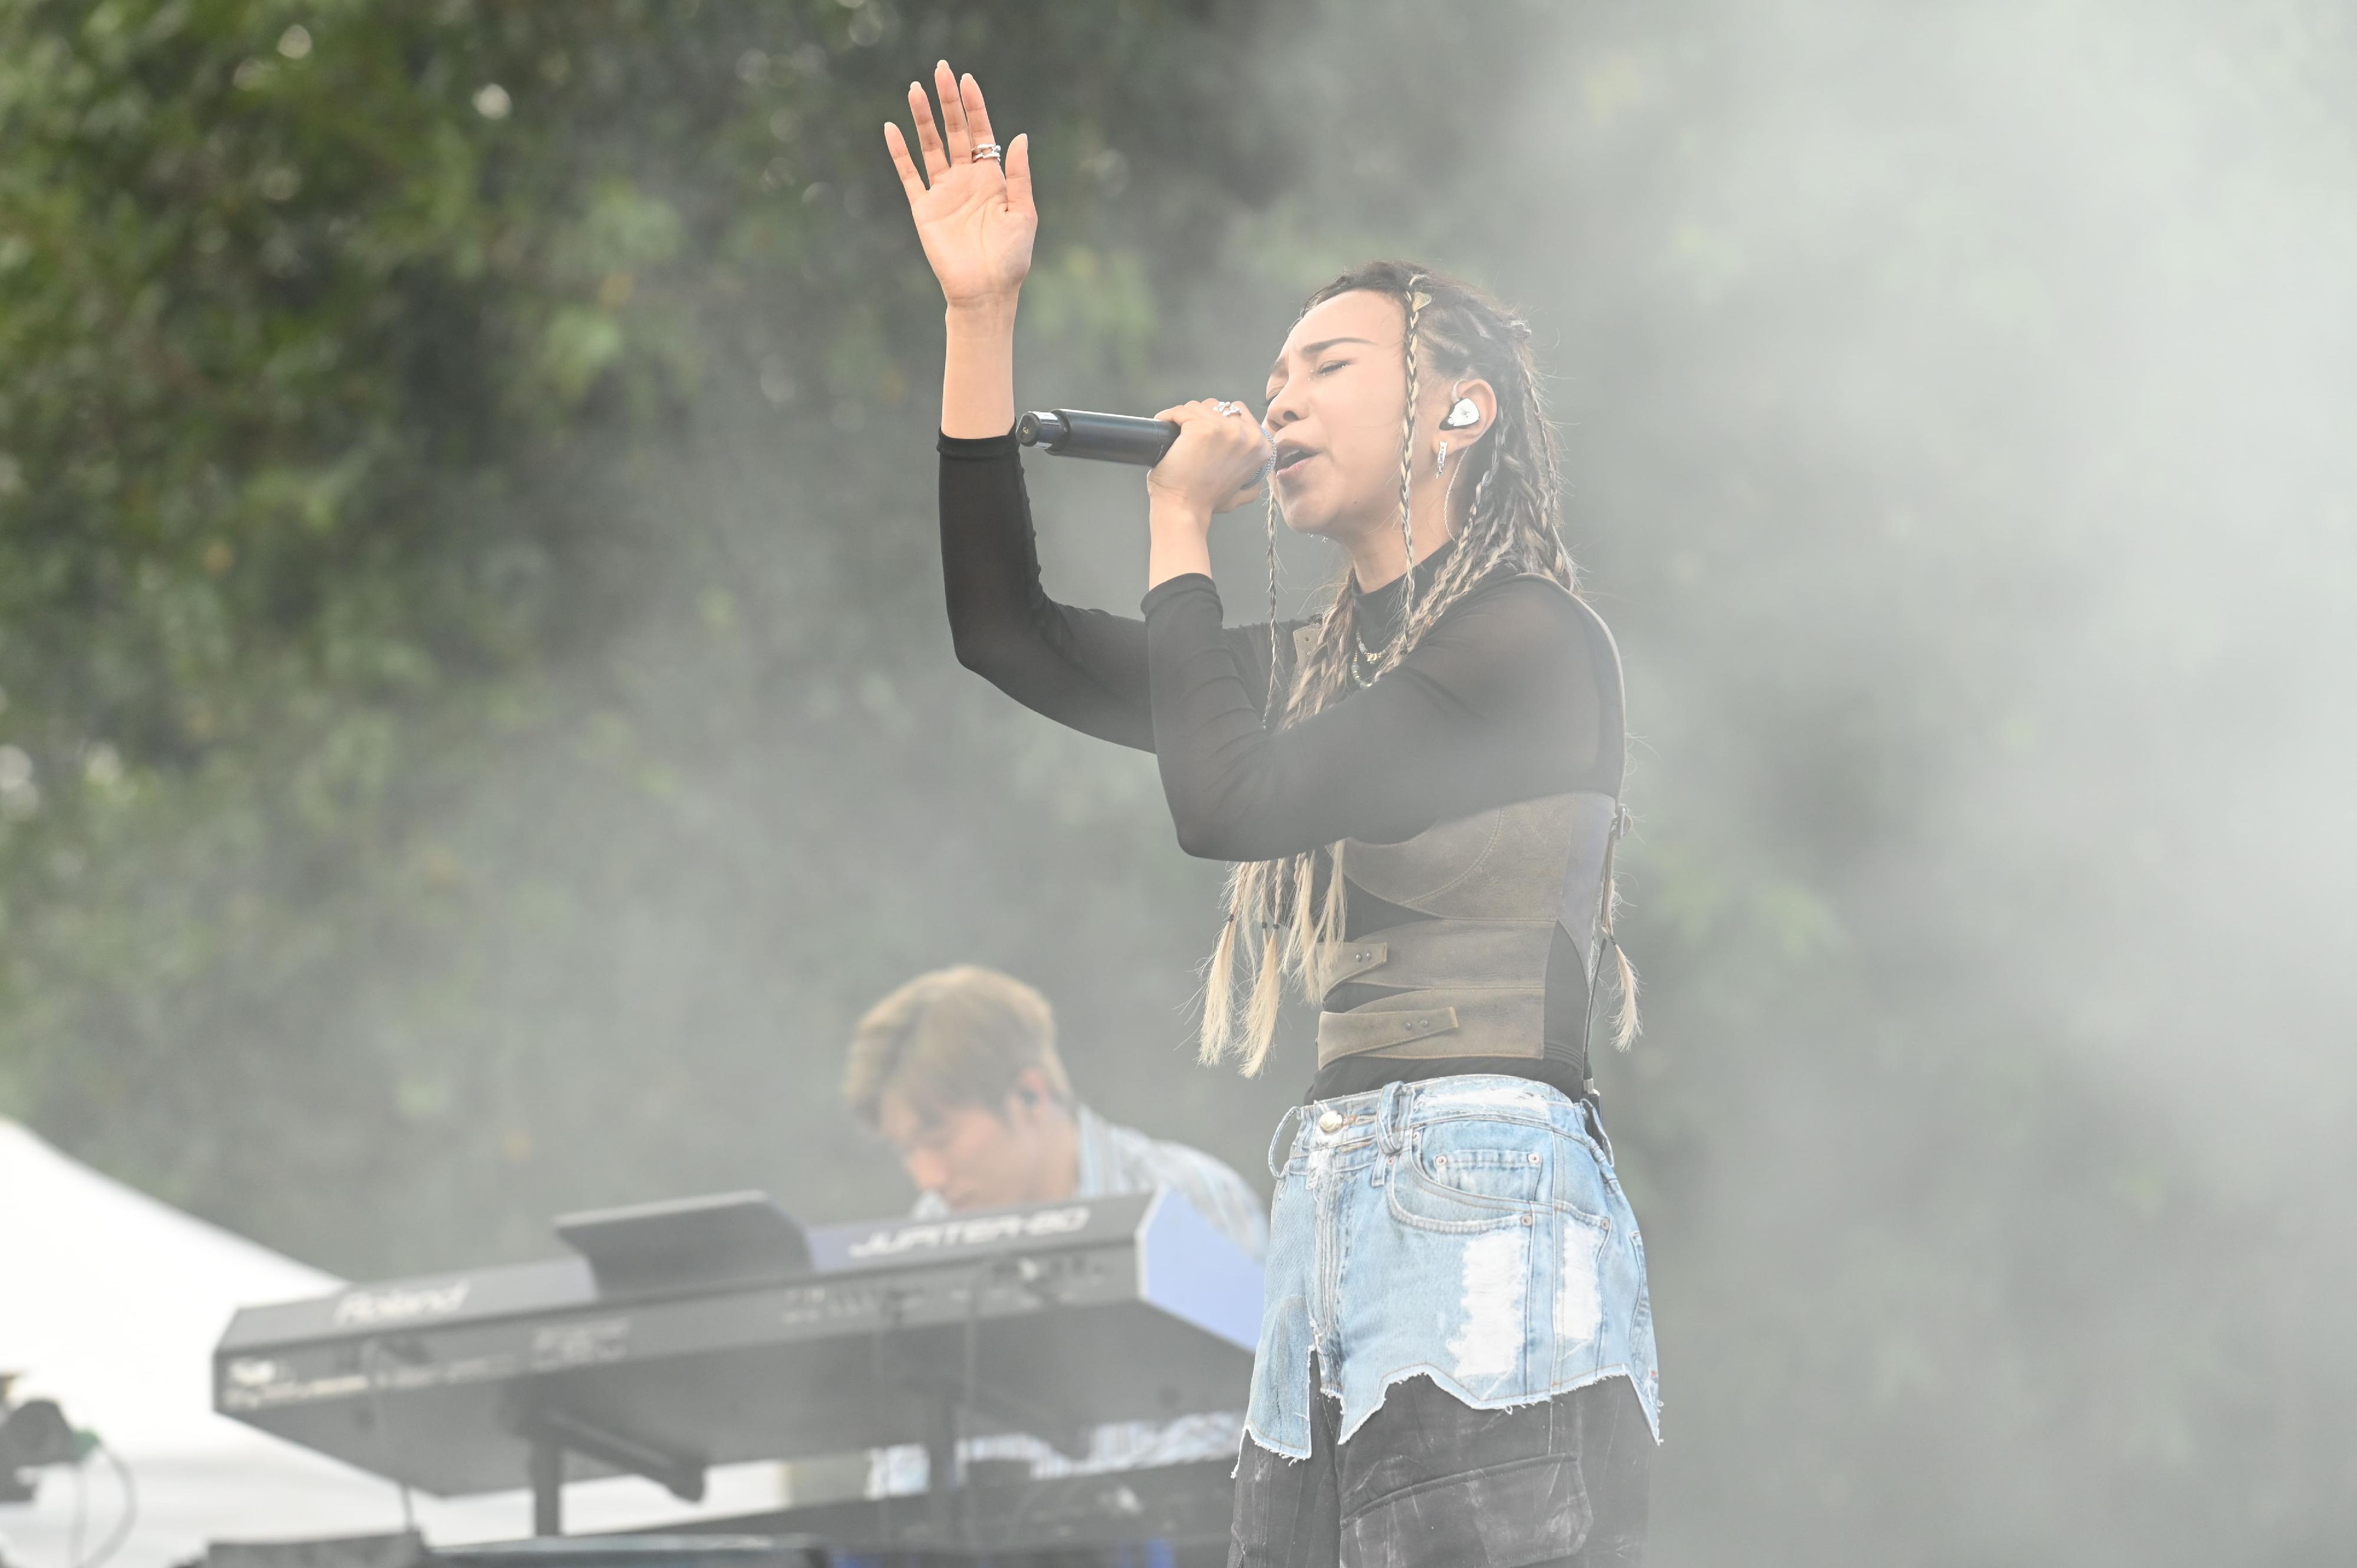 The second Hong Kong Pop Culture Festival opens today (April 6) at the central lawn of Victoria Park. Photo shows the soulful performance by singer AGA Kong at the opening programme “ImagineLand”.